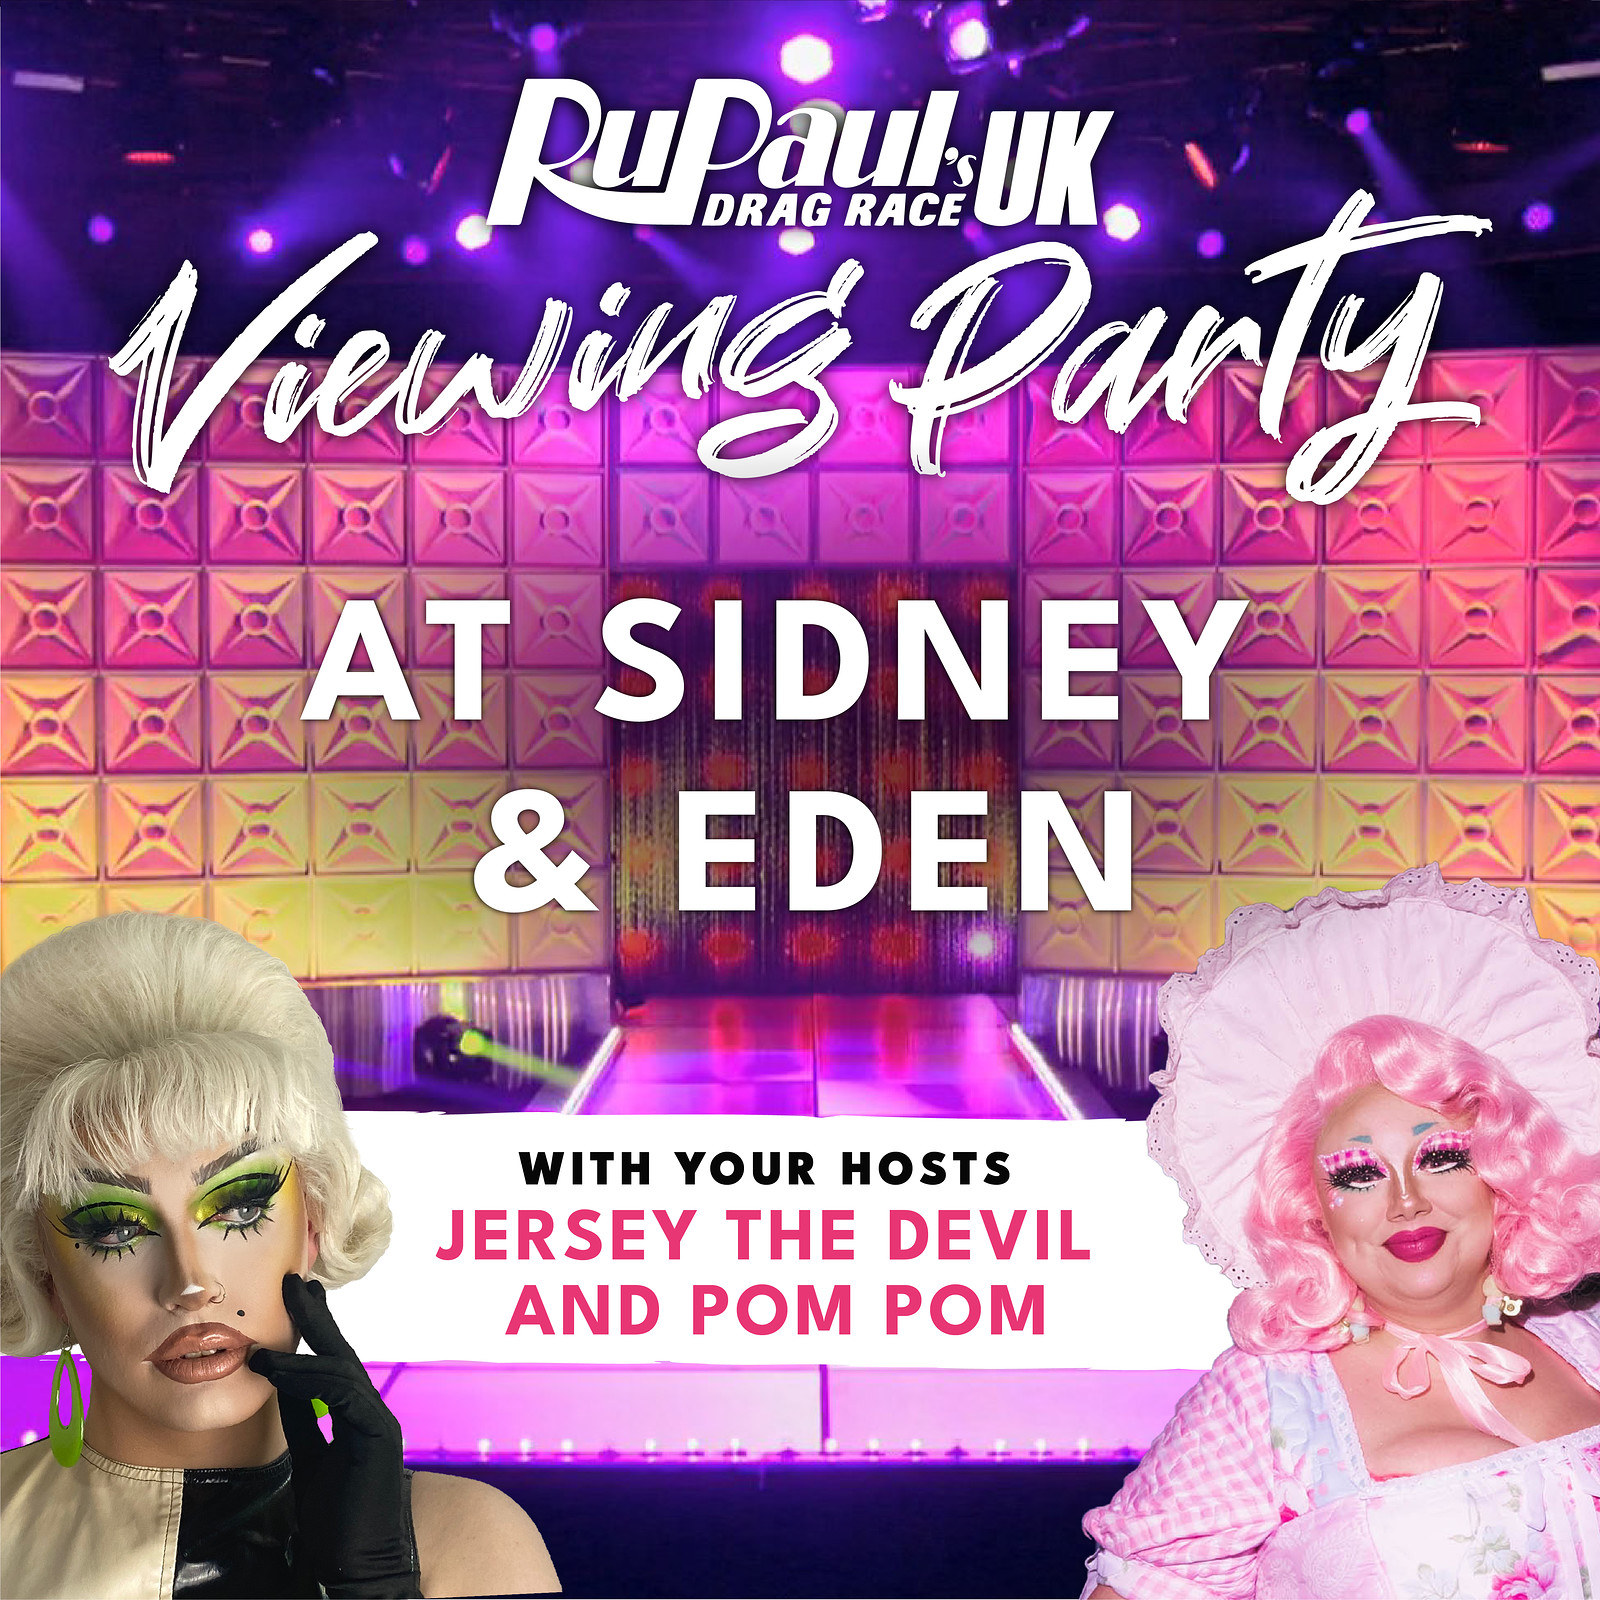 RuPaul's Drag Race UK Episode 5 Viewing Party at Sidney & Eden